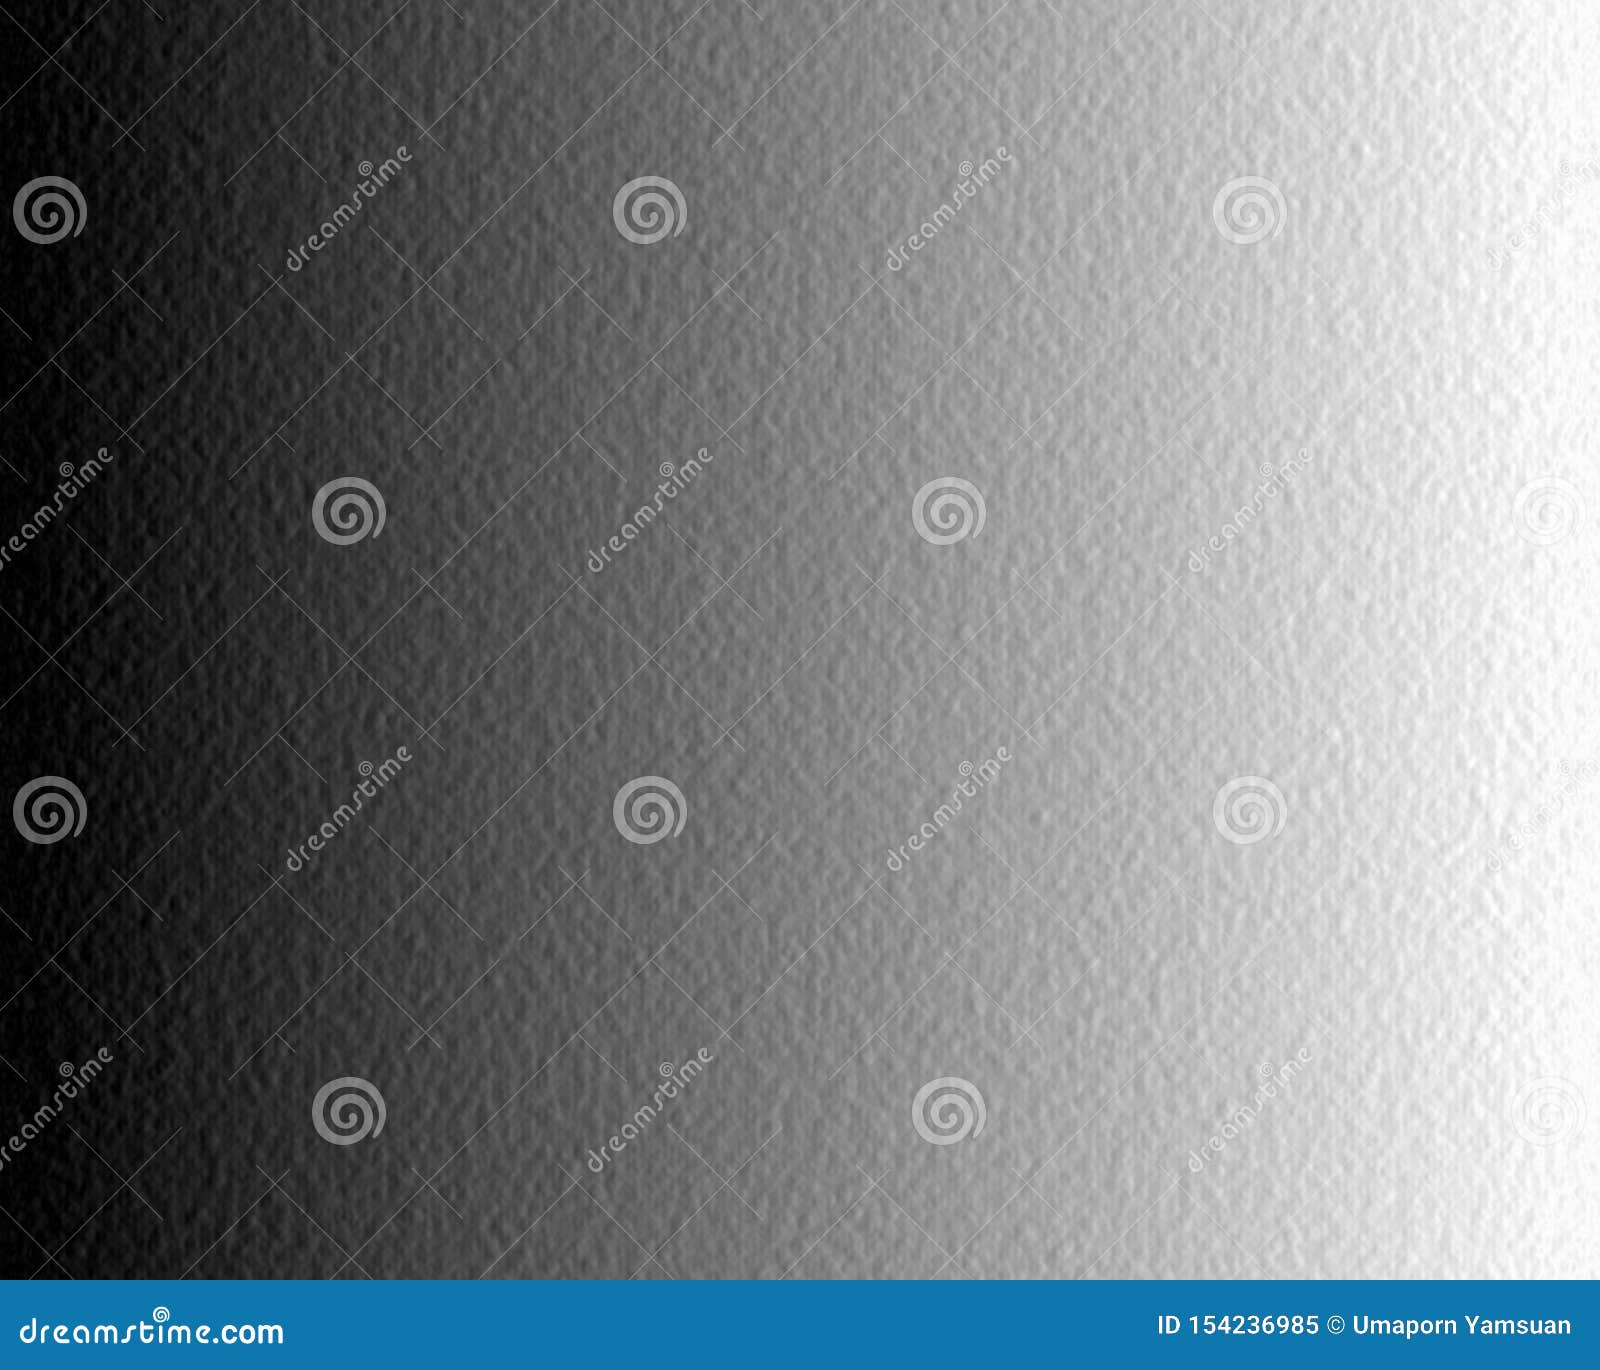 Black and White Abstract Background for Desktop Wallpaper or Website ...